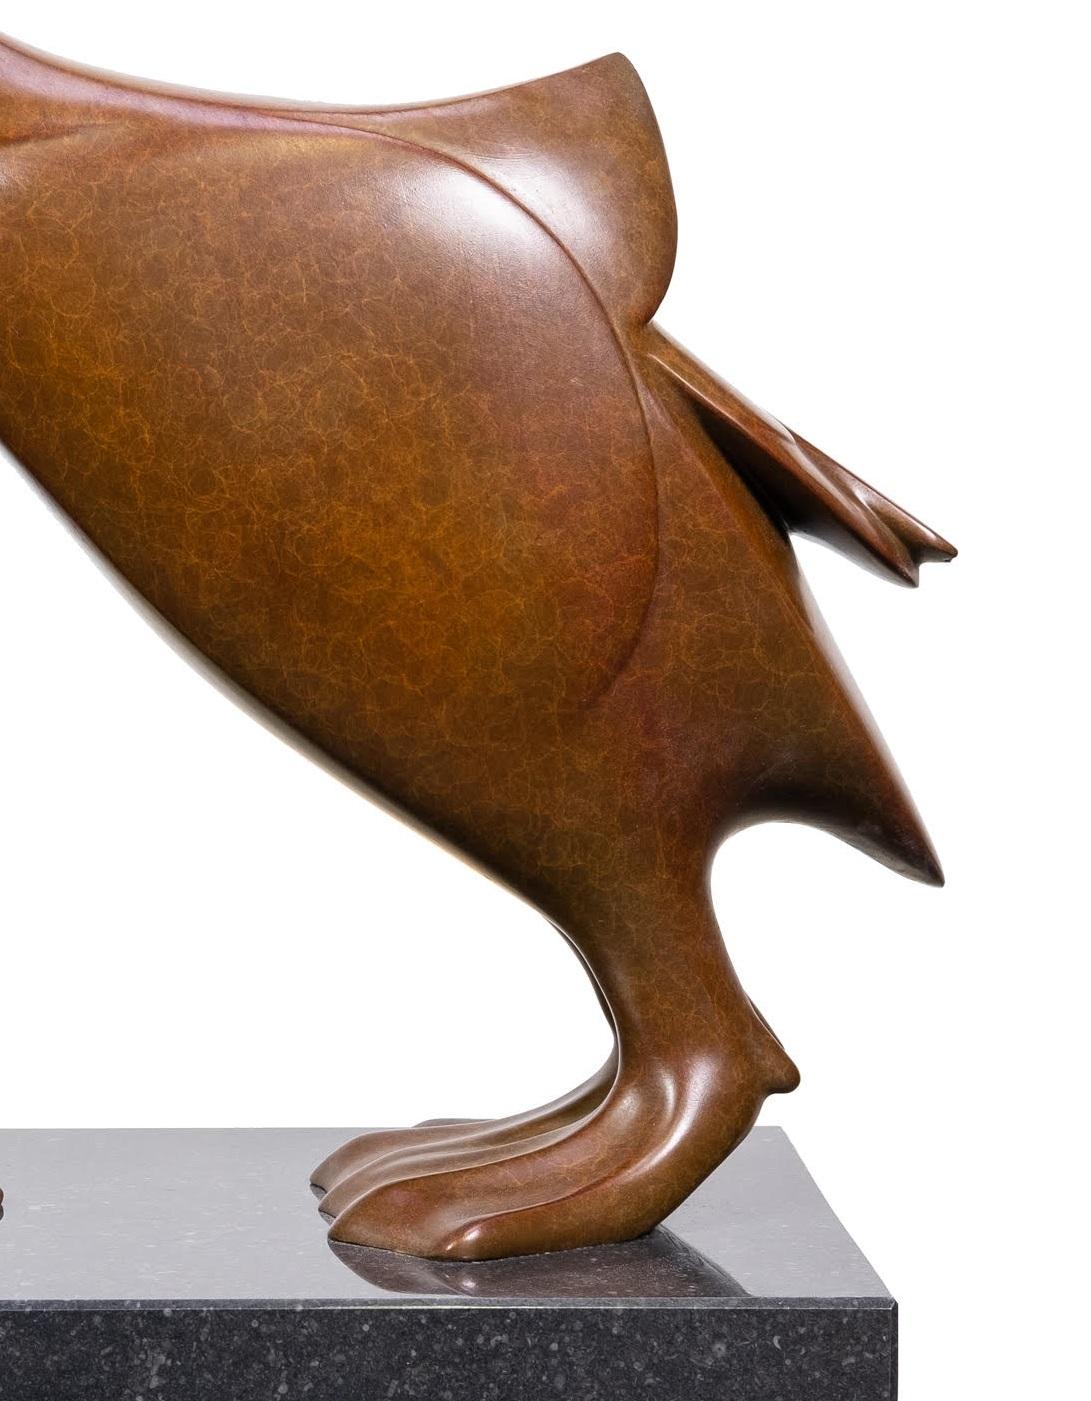 Twee Mandarijneenden Two Mandarin Ducks Bronze Sculpture Contemporary
Evert den Hartog (born in Groot-Ammers, The Netherlands in 1949) followed his education to be a sculptor at the Rotterdam Academy of Visual Arts. In the years 1971-1976 his